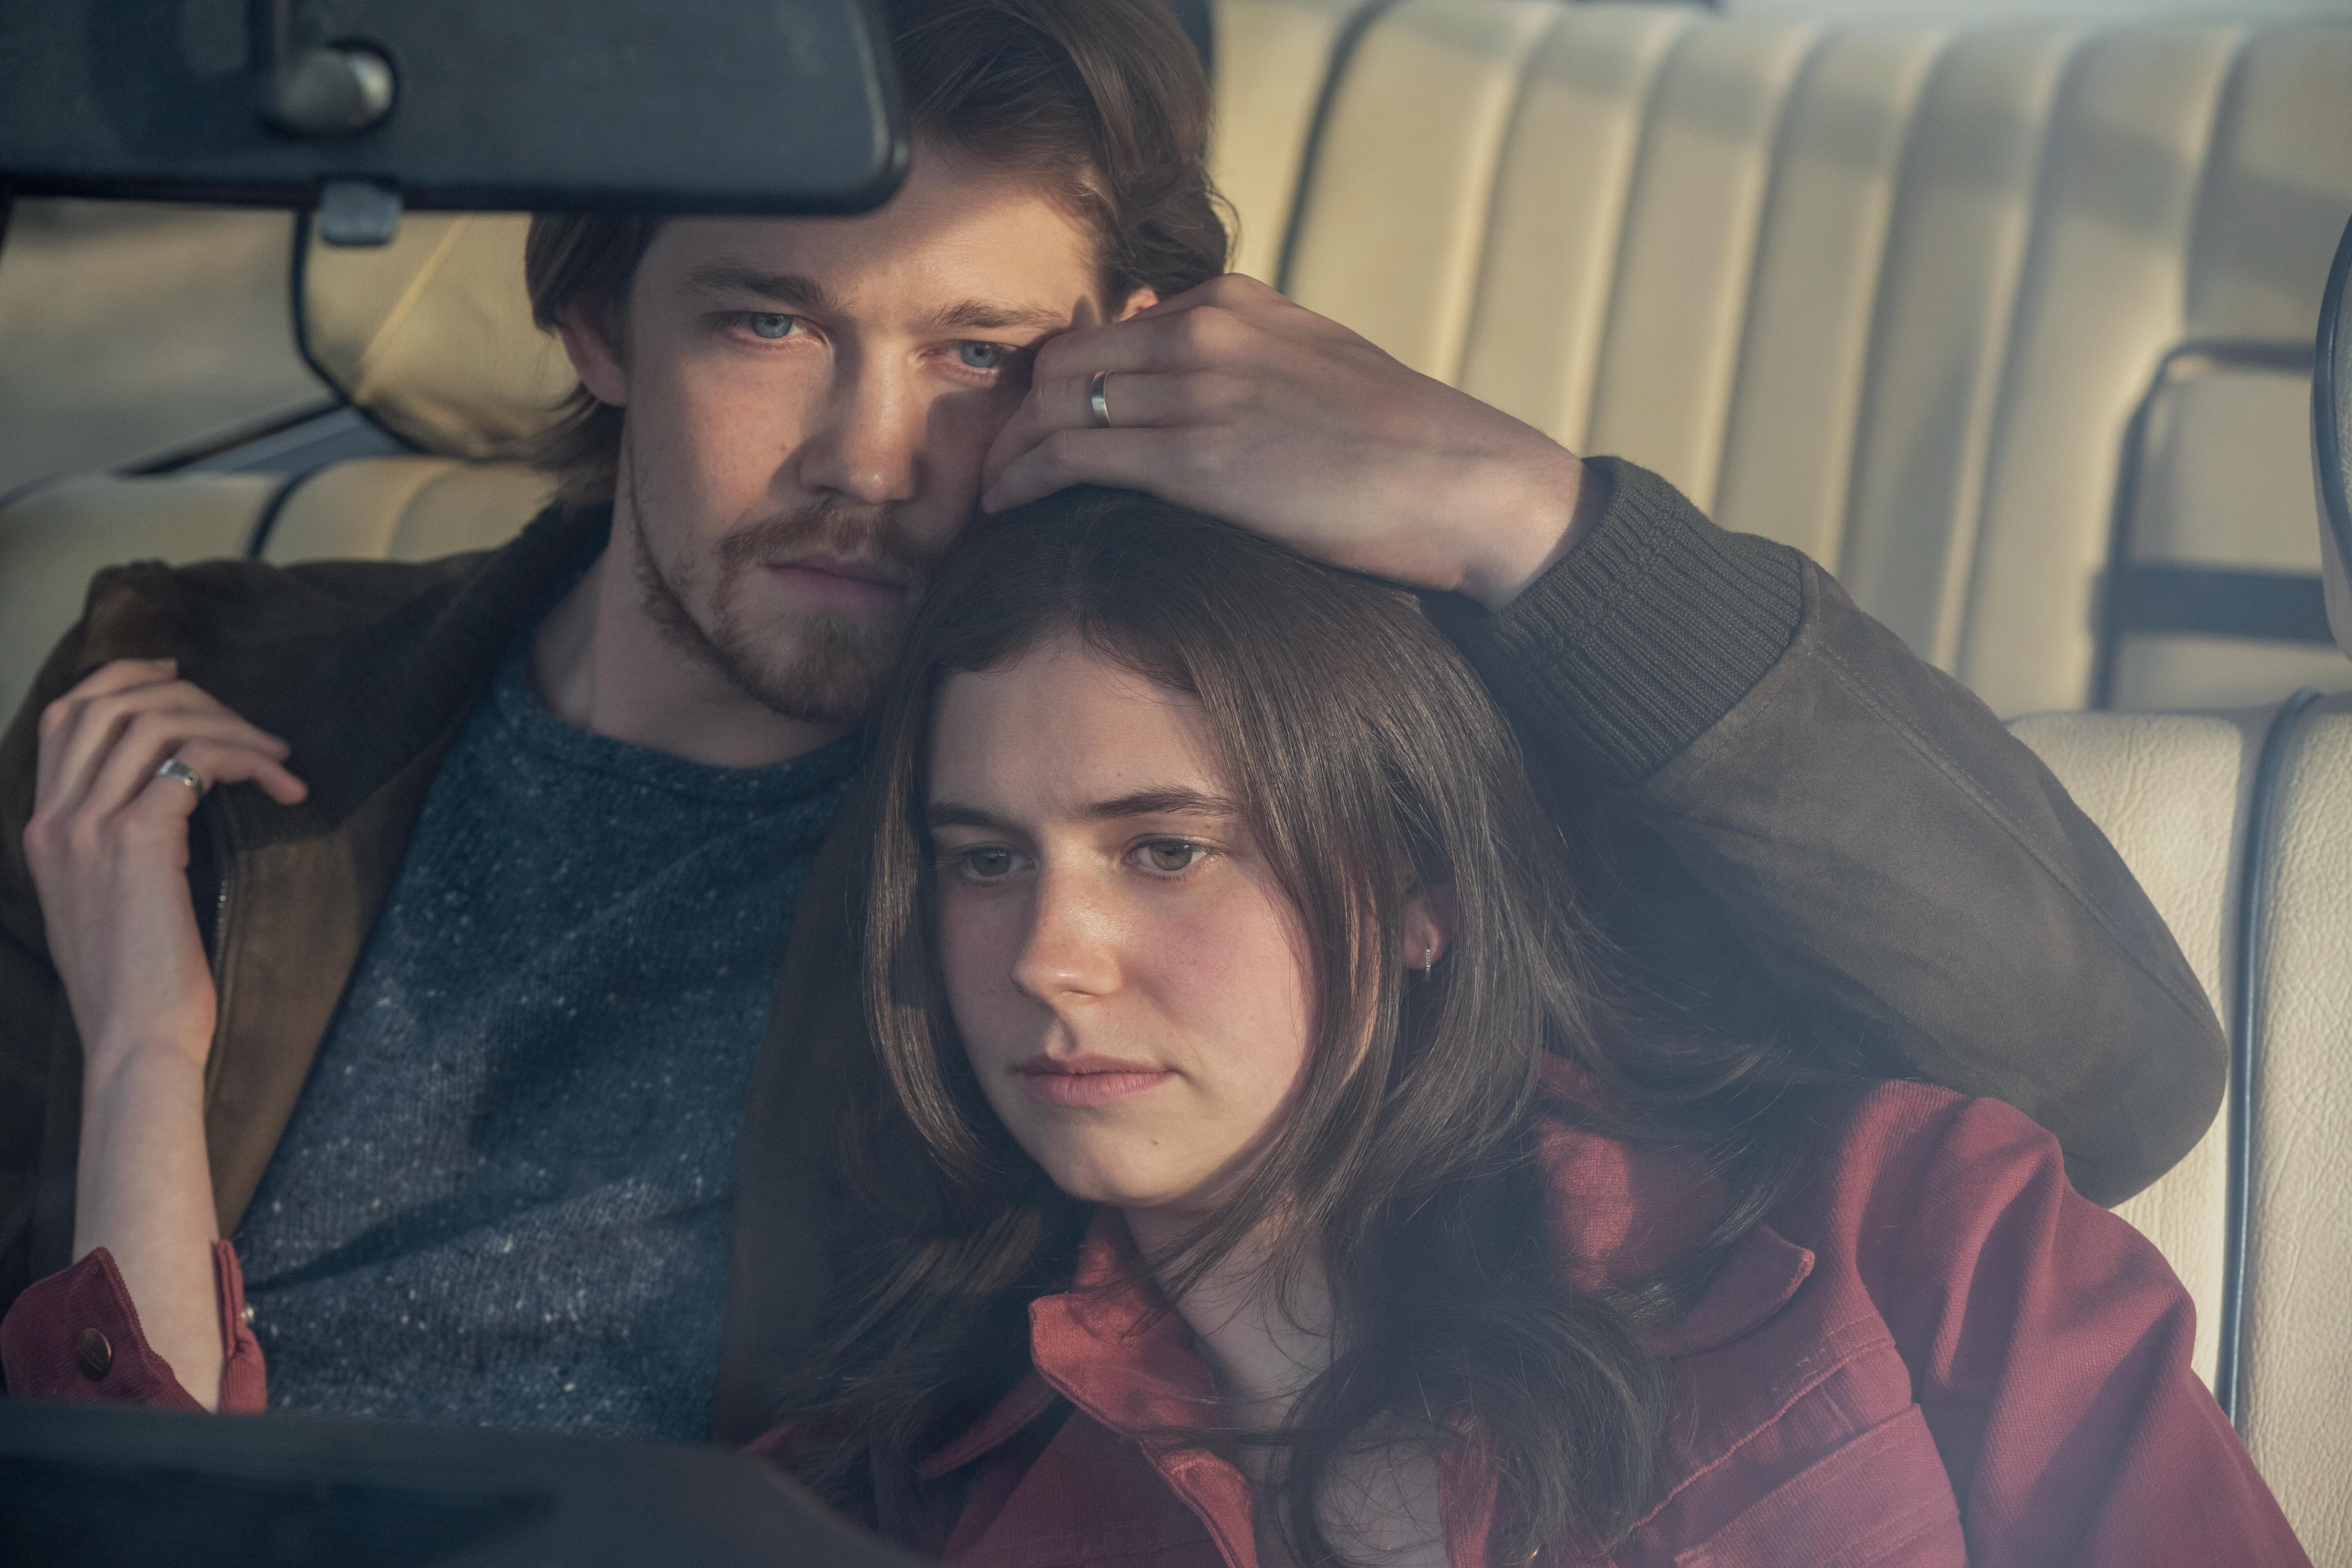 Joe Alwyn with his hand on Alison Oliver's head in Hulu's 'Conversations With Friends'